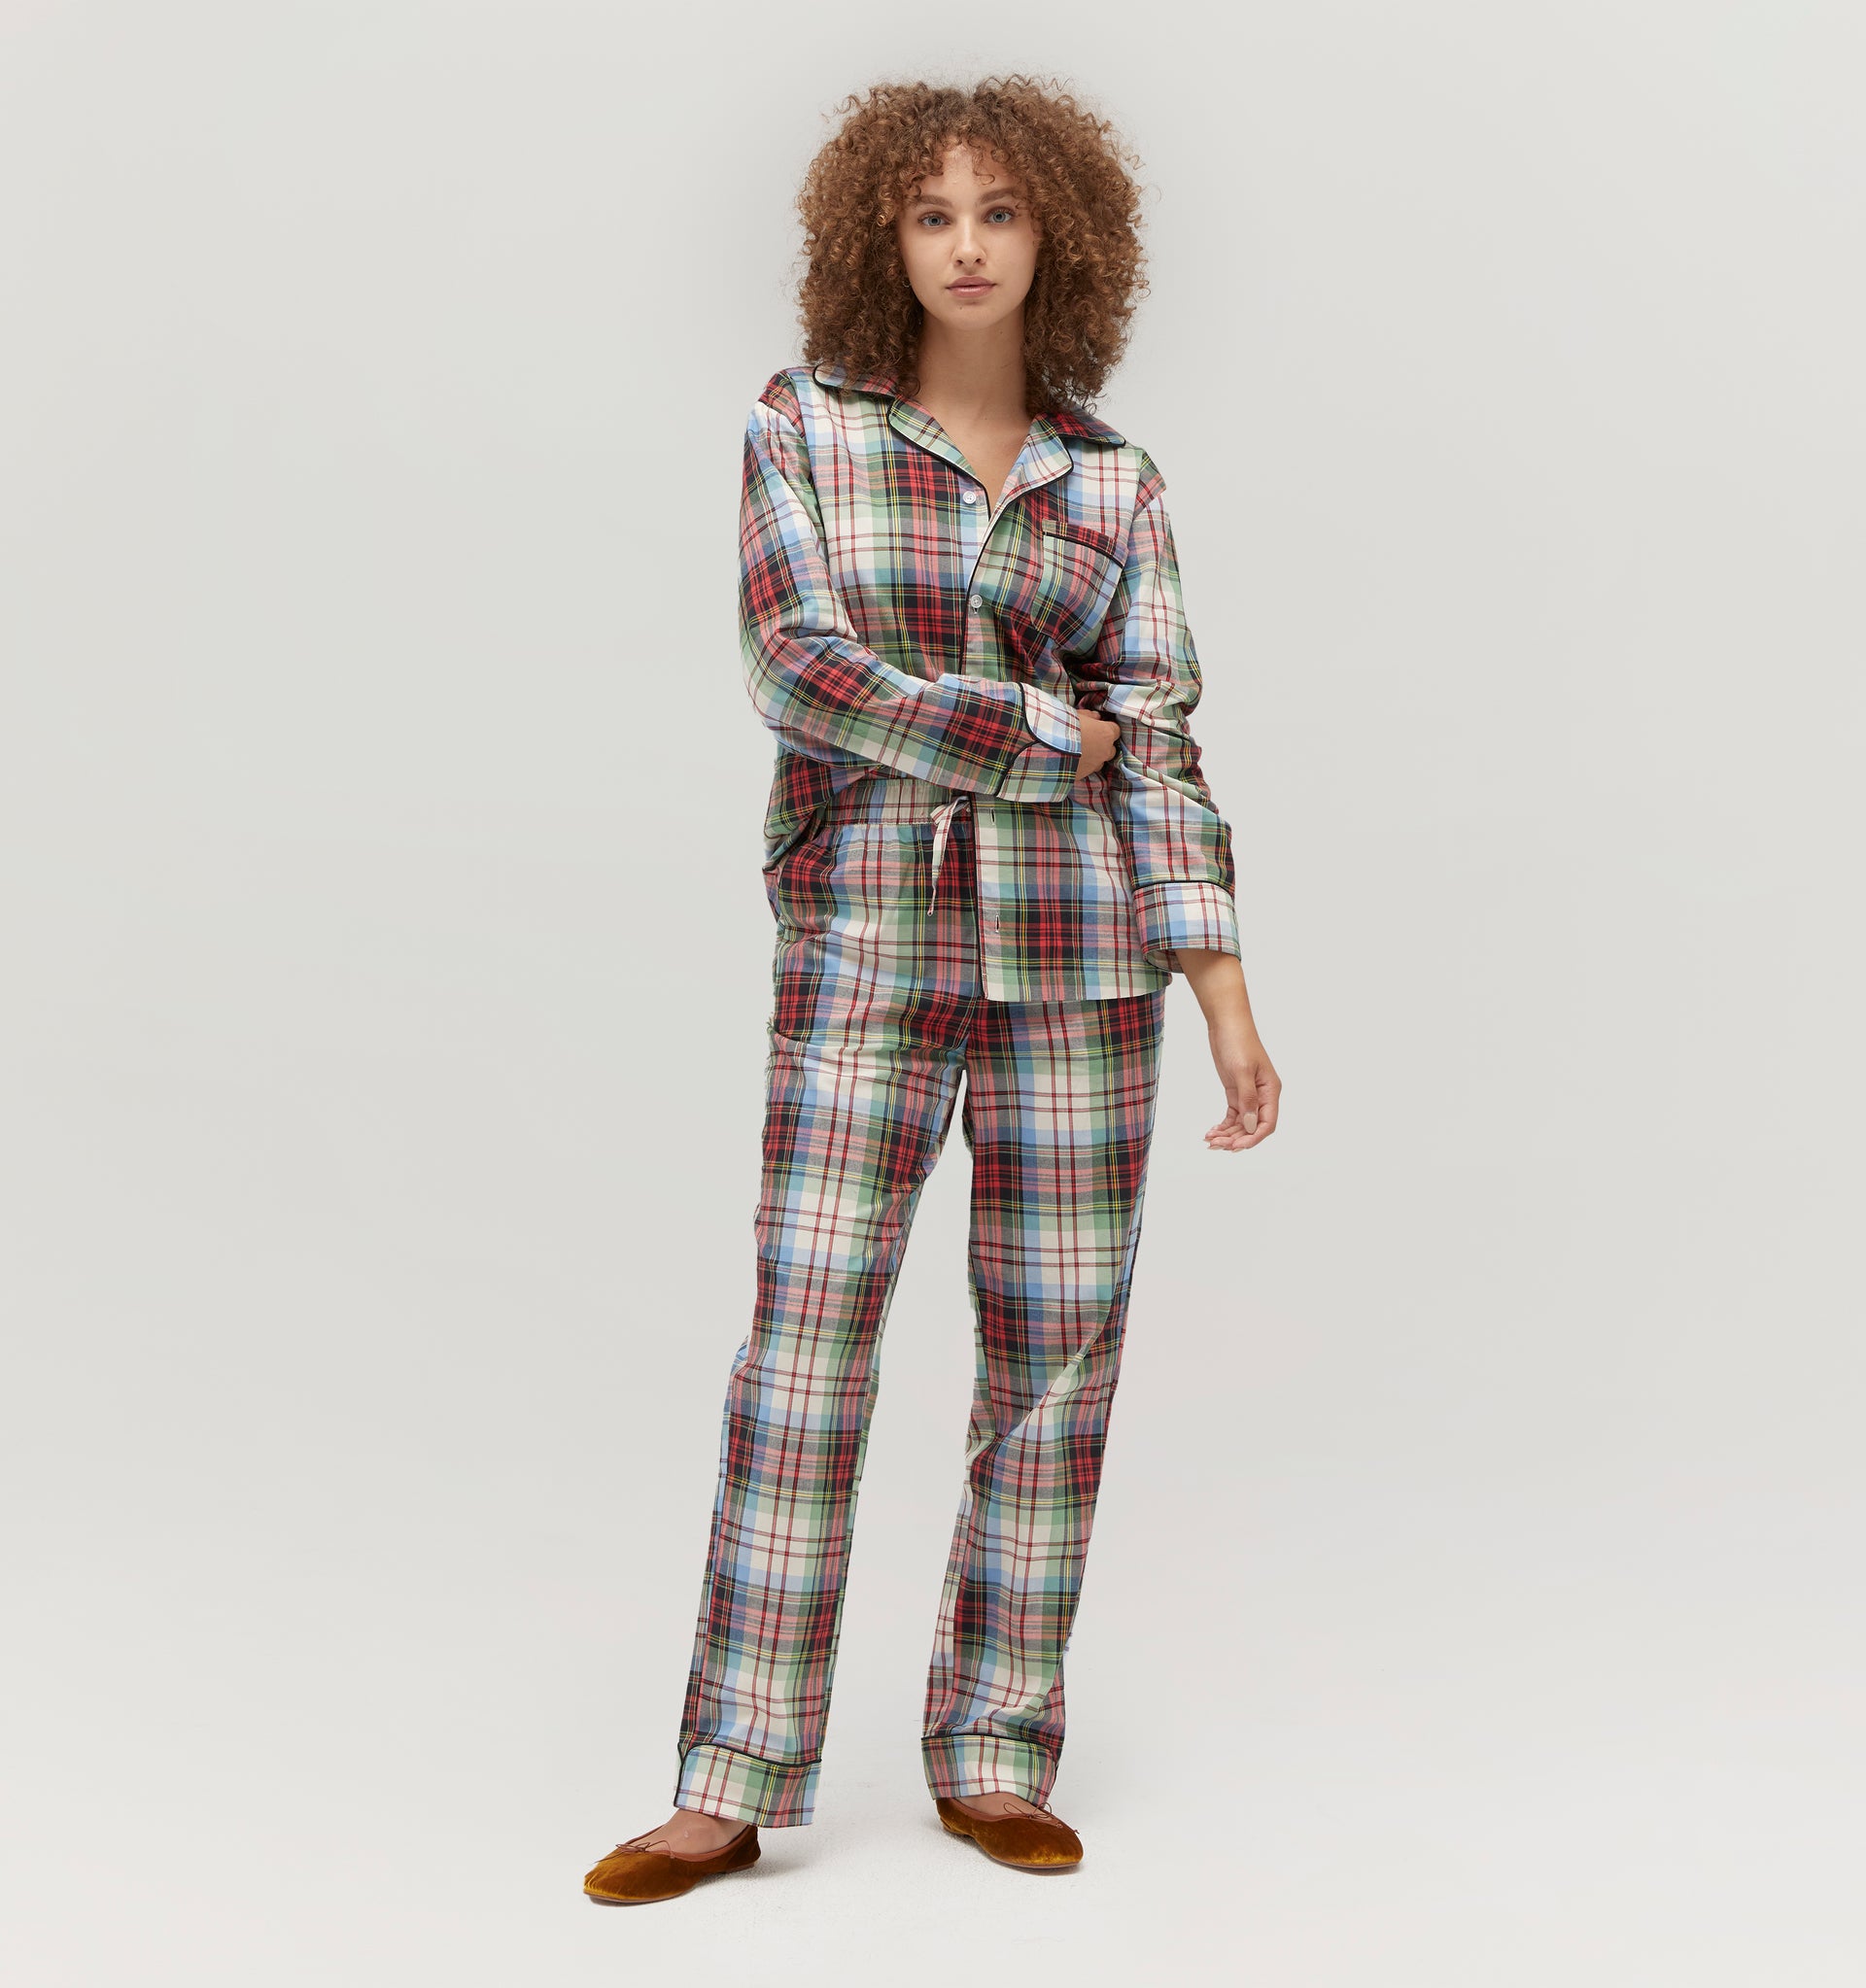 Matching women's pajama sets for winter: Flannel, washable silk